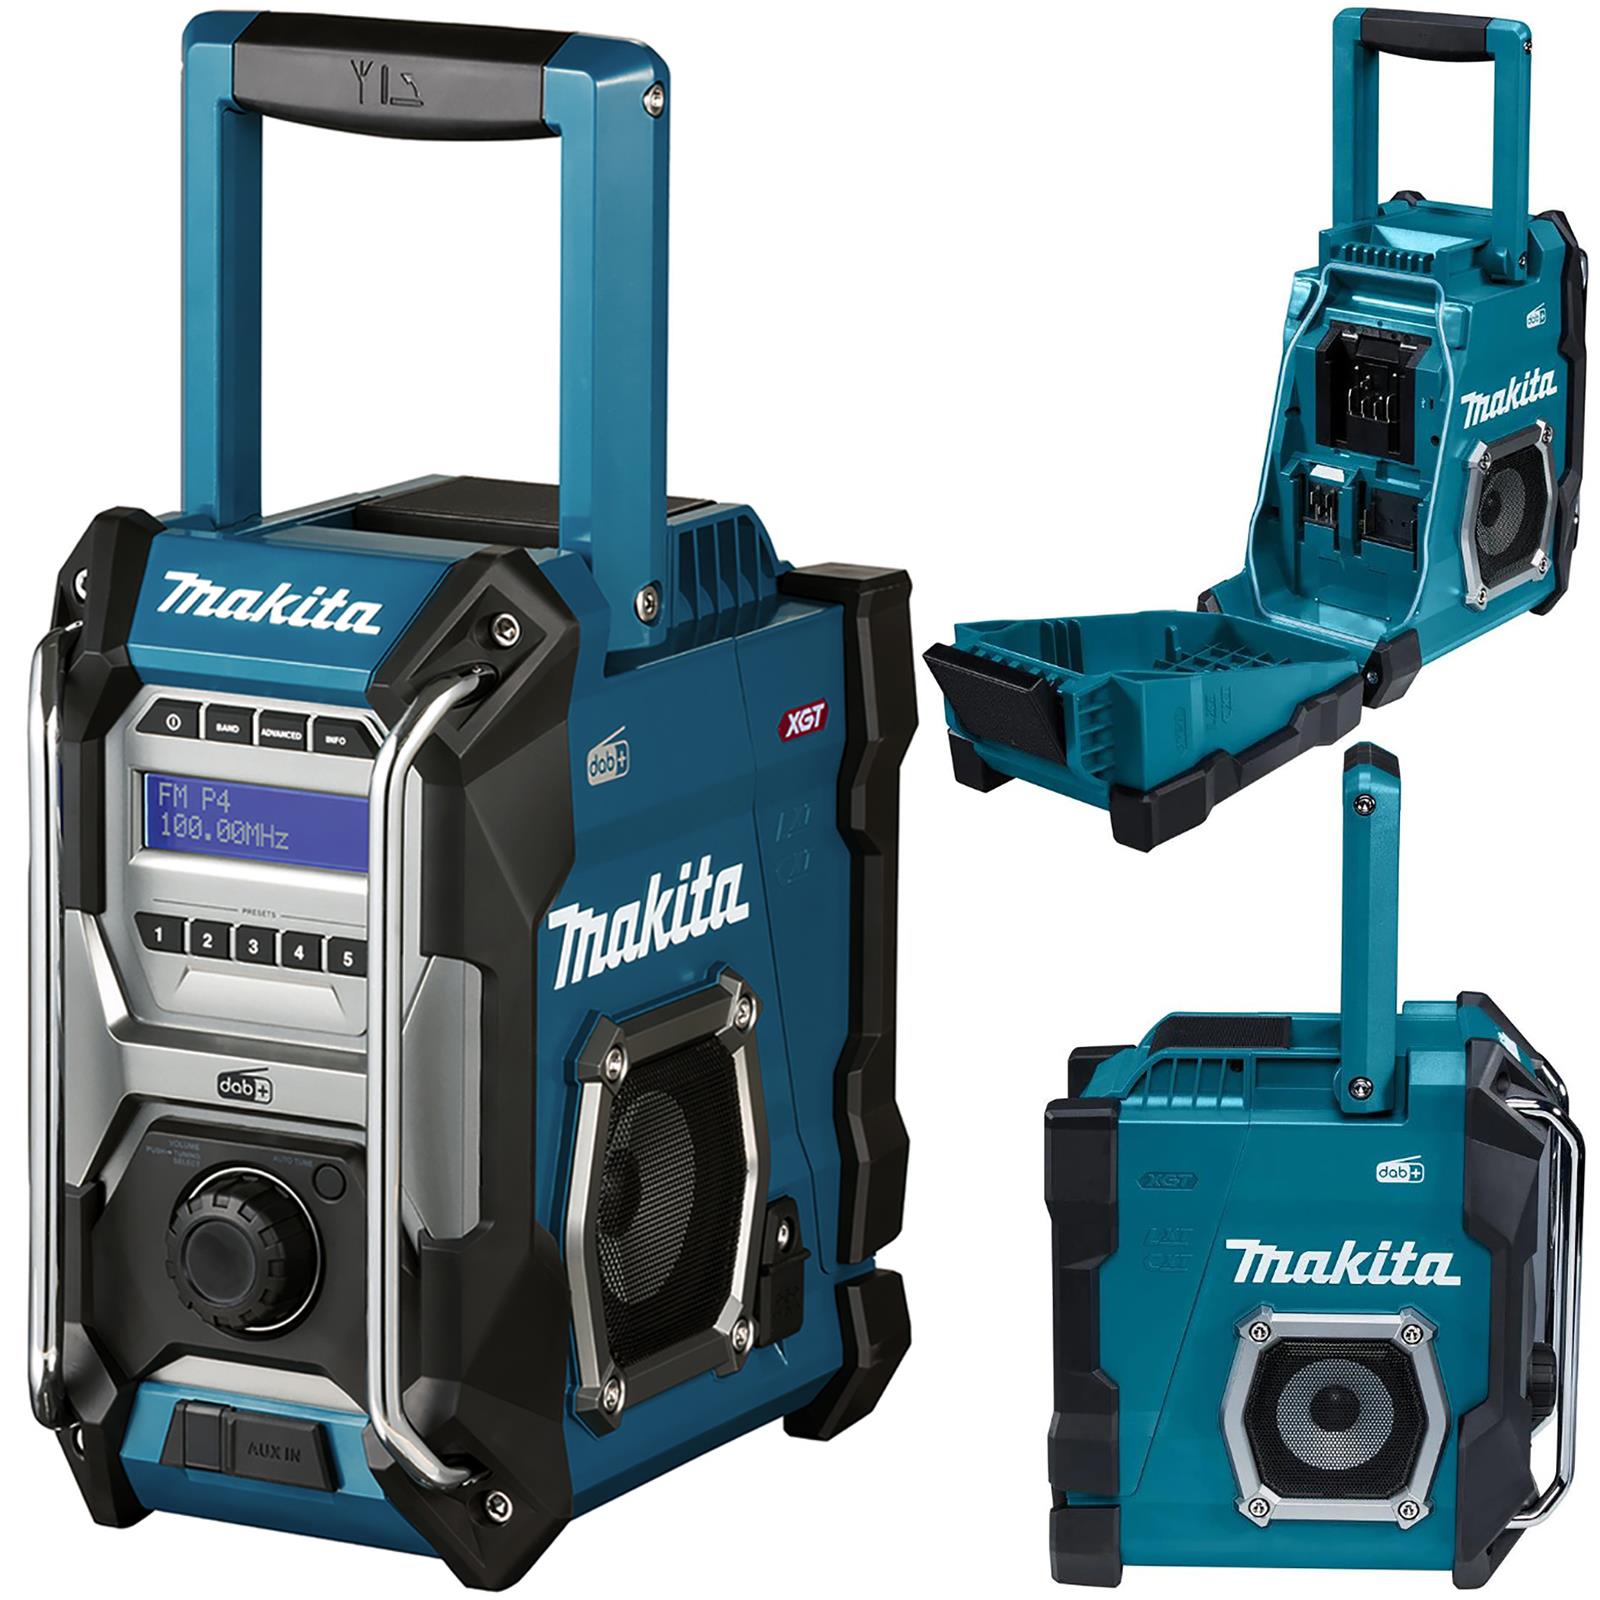 Makita DAB Radio Job Site Work Cordless CXT LXT XGT Phone Charger USB AUX MR003GZ Body Only